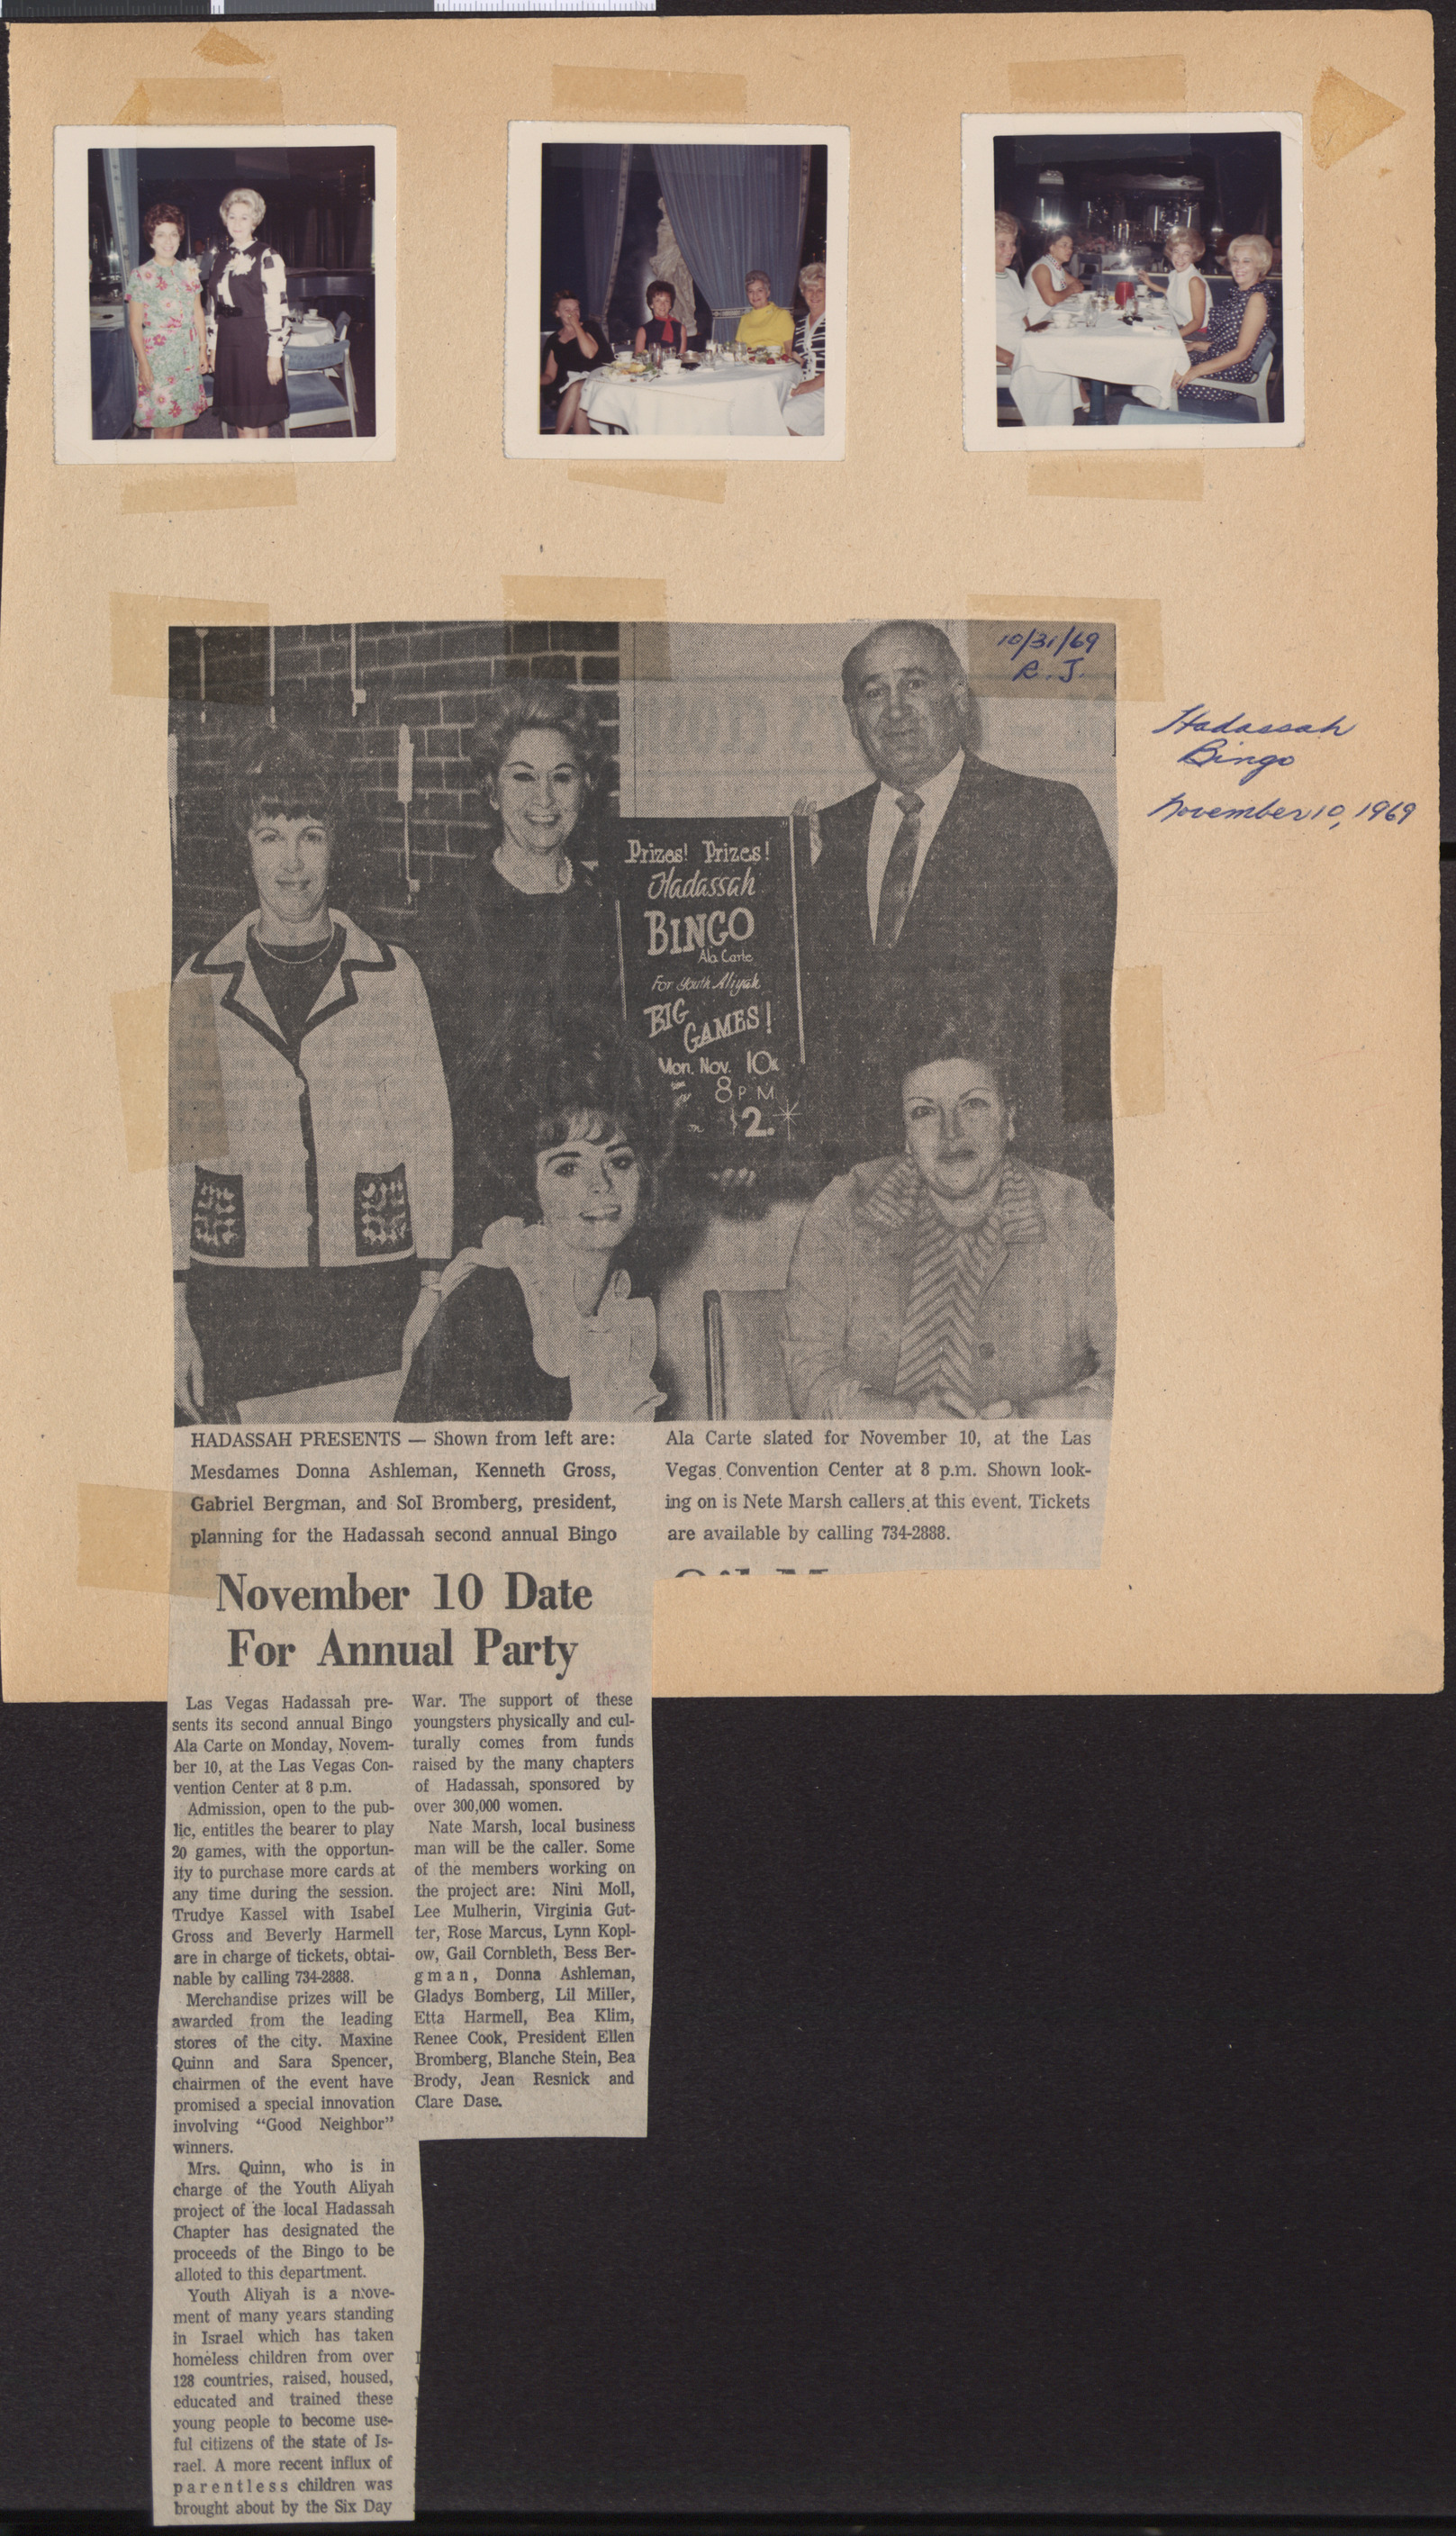 Photographs of Hadassah luncheon, and newspaper clipping, November 10 Date for Annual Party, October 31, 1969